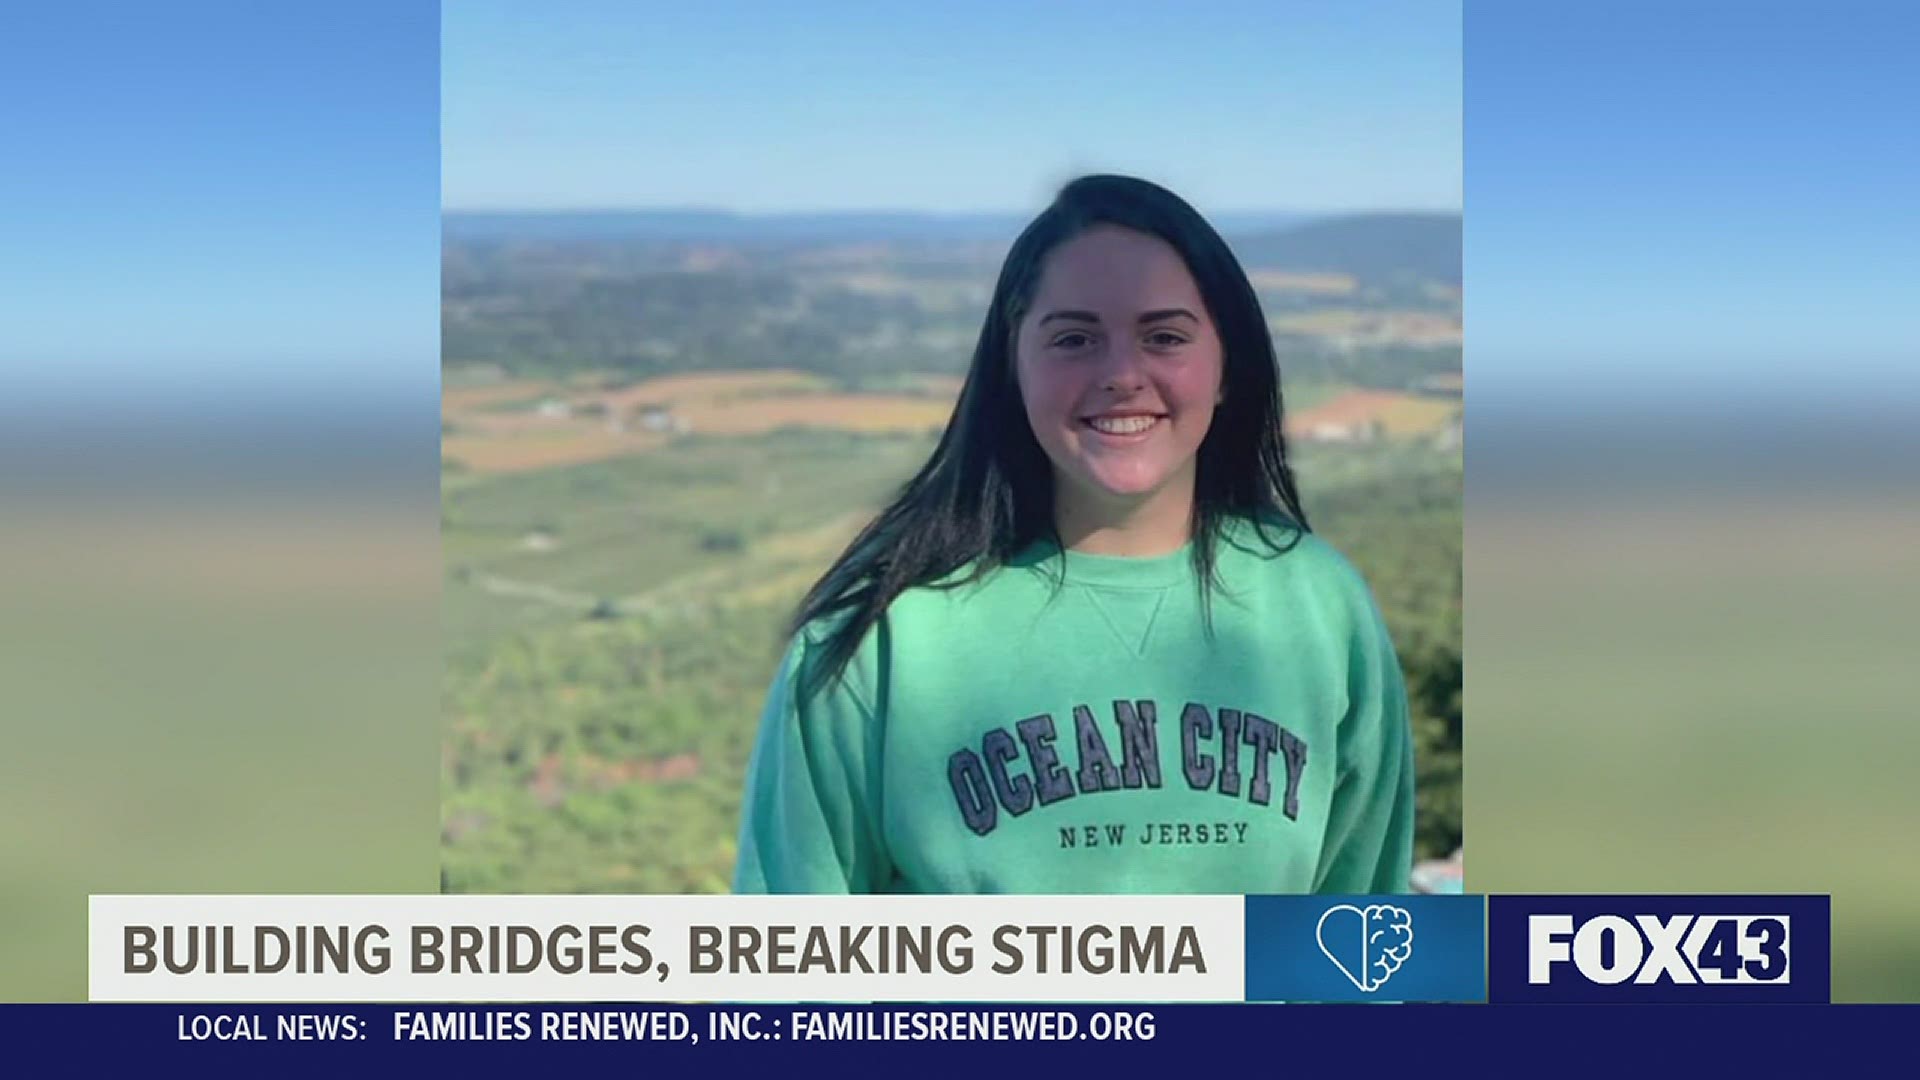 A York County father is taking his experiences, after his 15-year-old daughter took her own life, to provide a safe-space for those facing mental health issues.